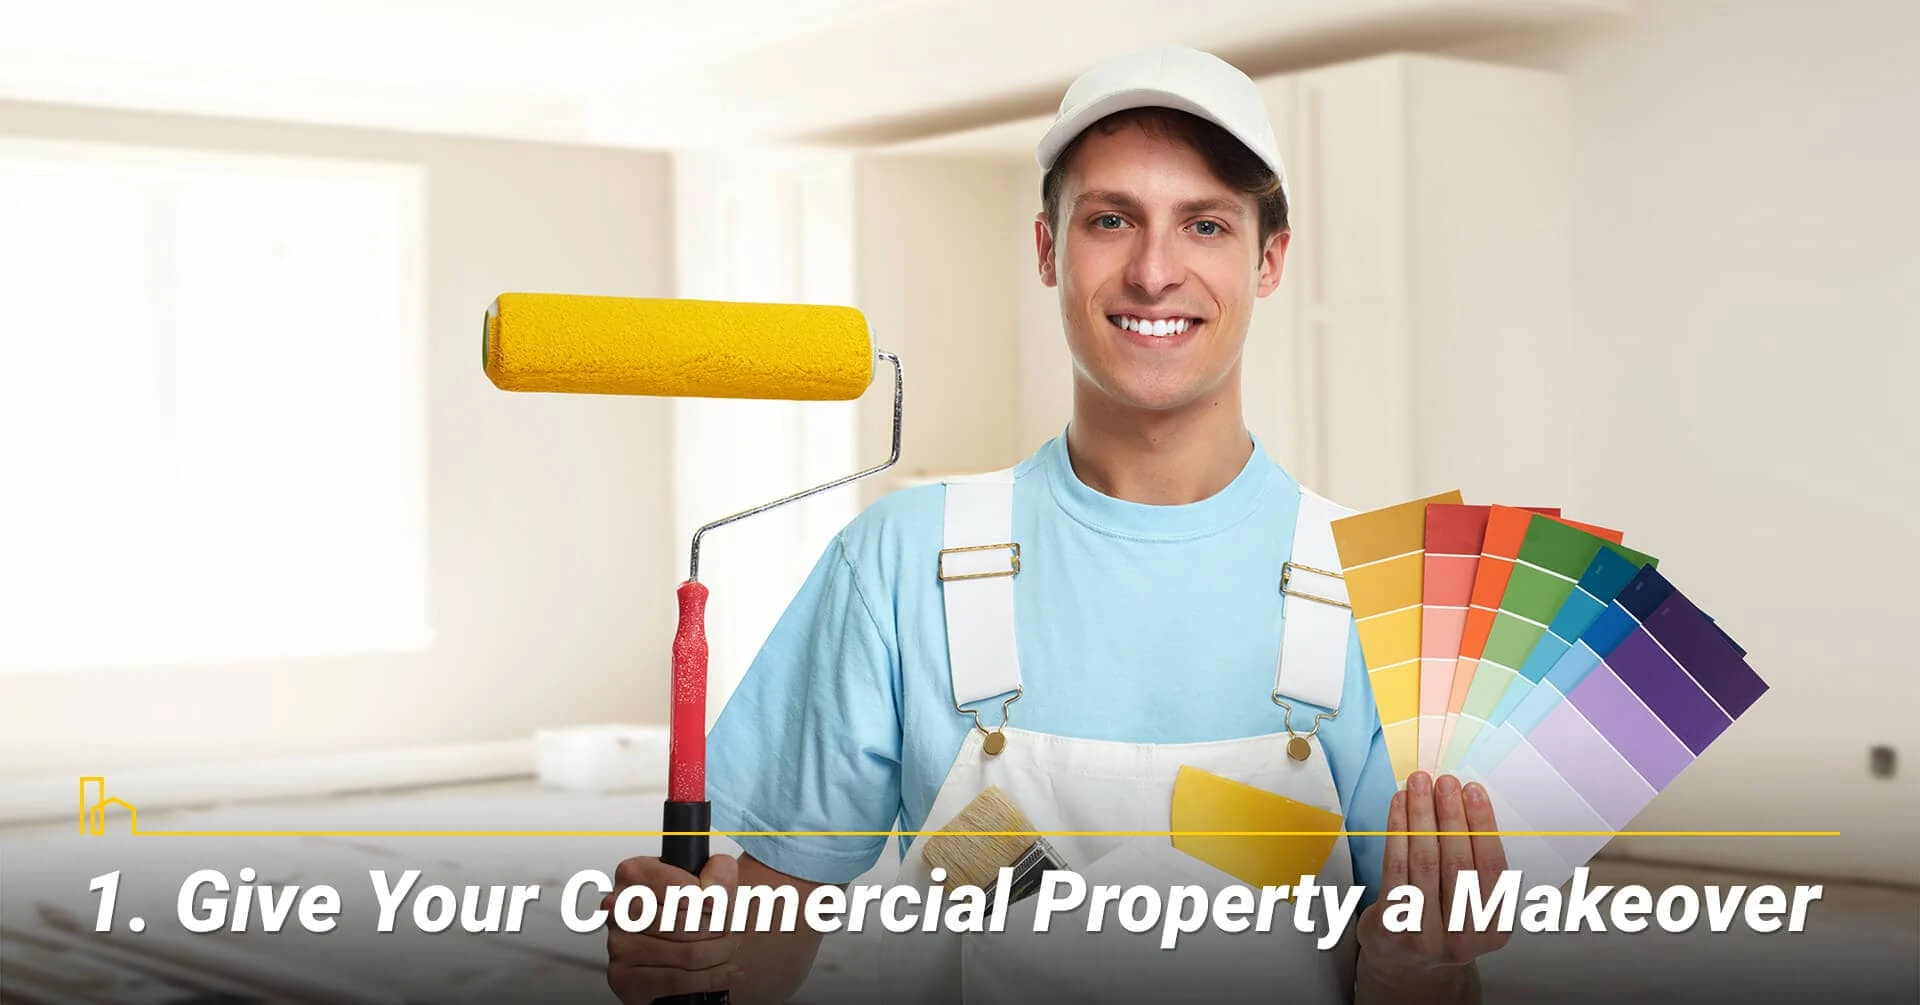 Give Your Commercial Property a Makeover, upgrade your property